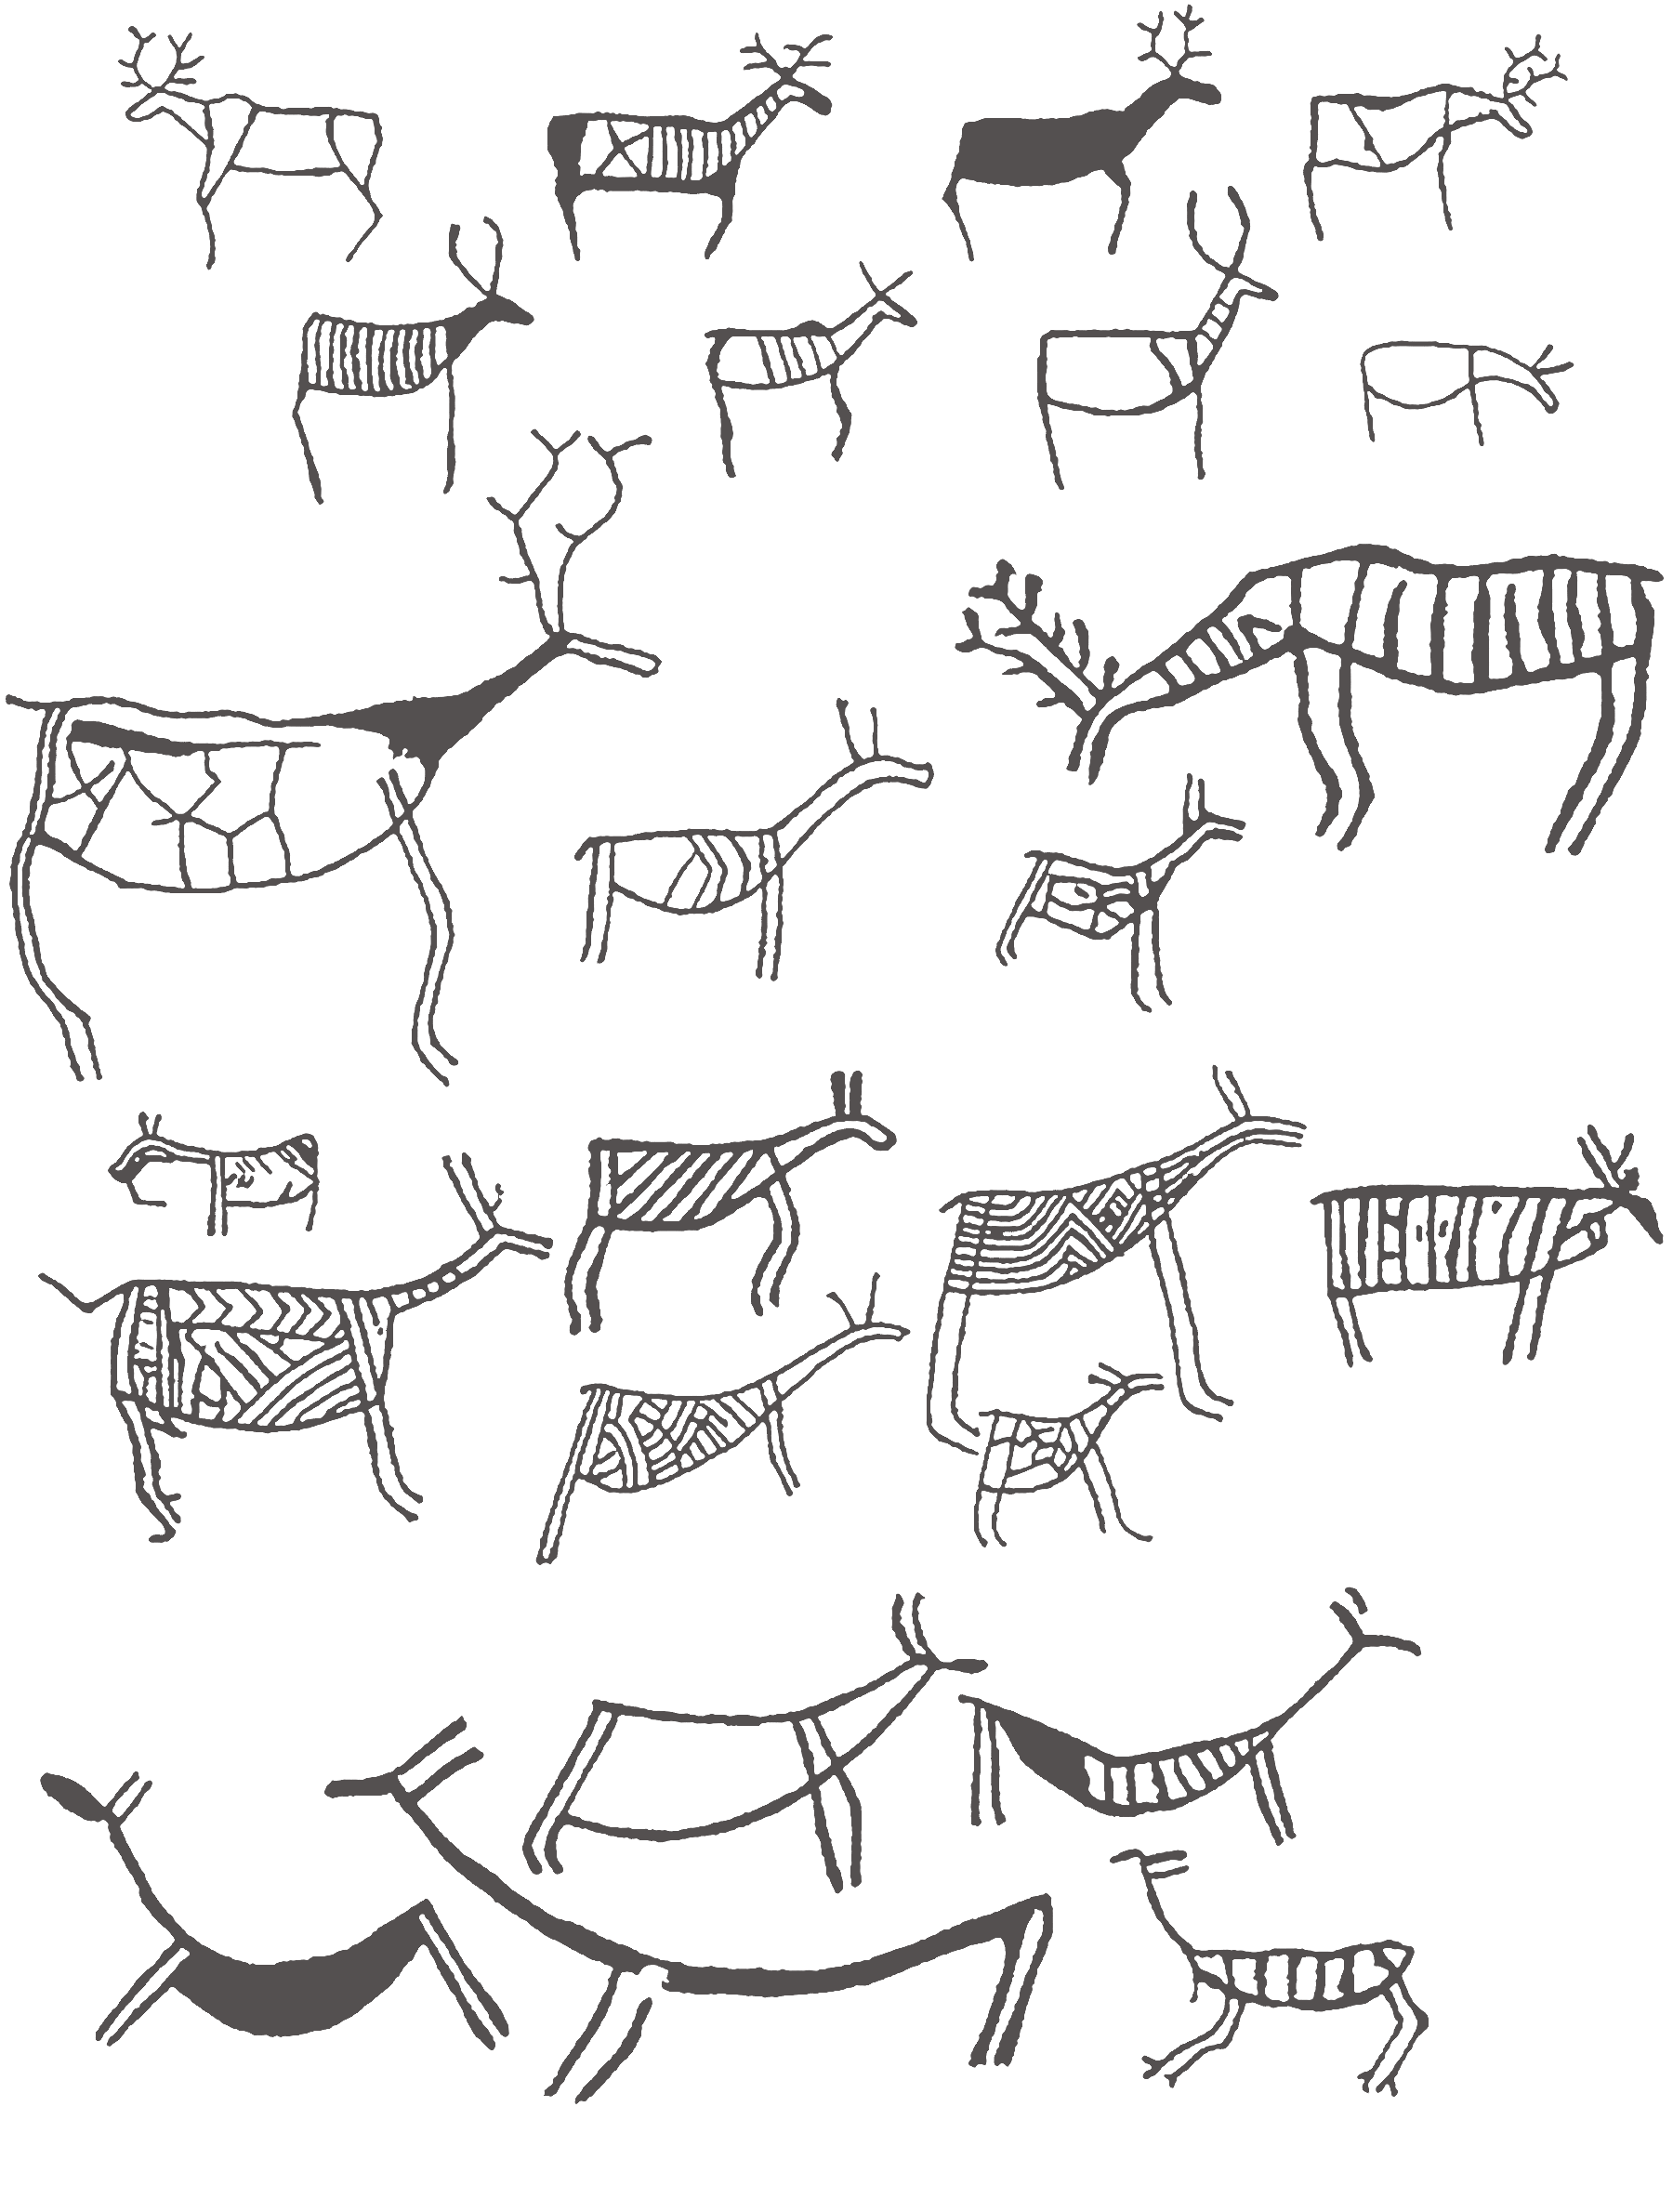 Attempts to understand the development of the animal figures in Vingen prepared by Egil Bakka. He argues for a change in style and expression through four phases where examples of the oldest type - the most naturalistic - are reproduced at the top and where the subsequent phases which gradually become more stylistic and schematic are presented below Vingen Rock Art Carvings Norway